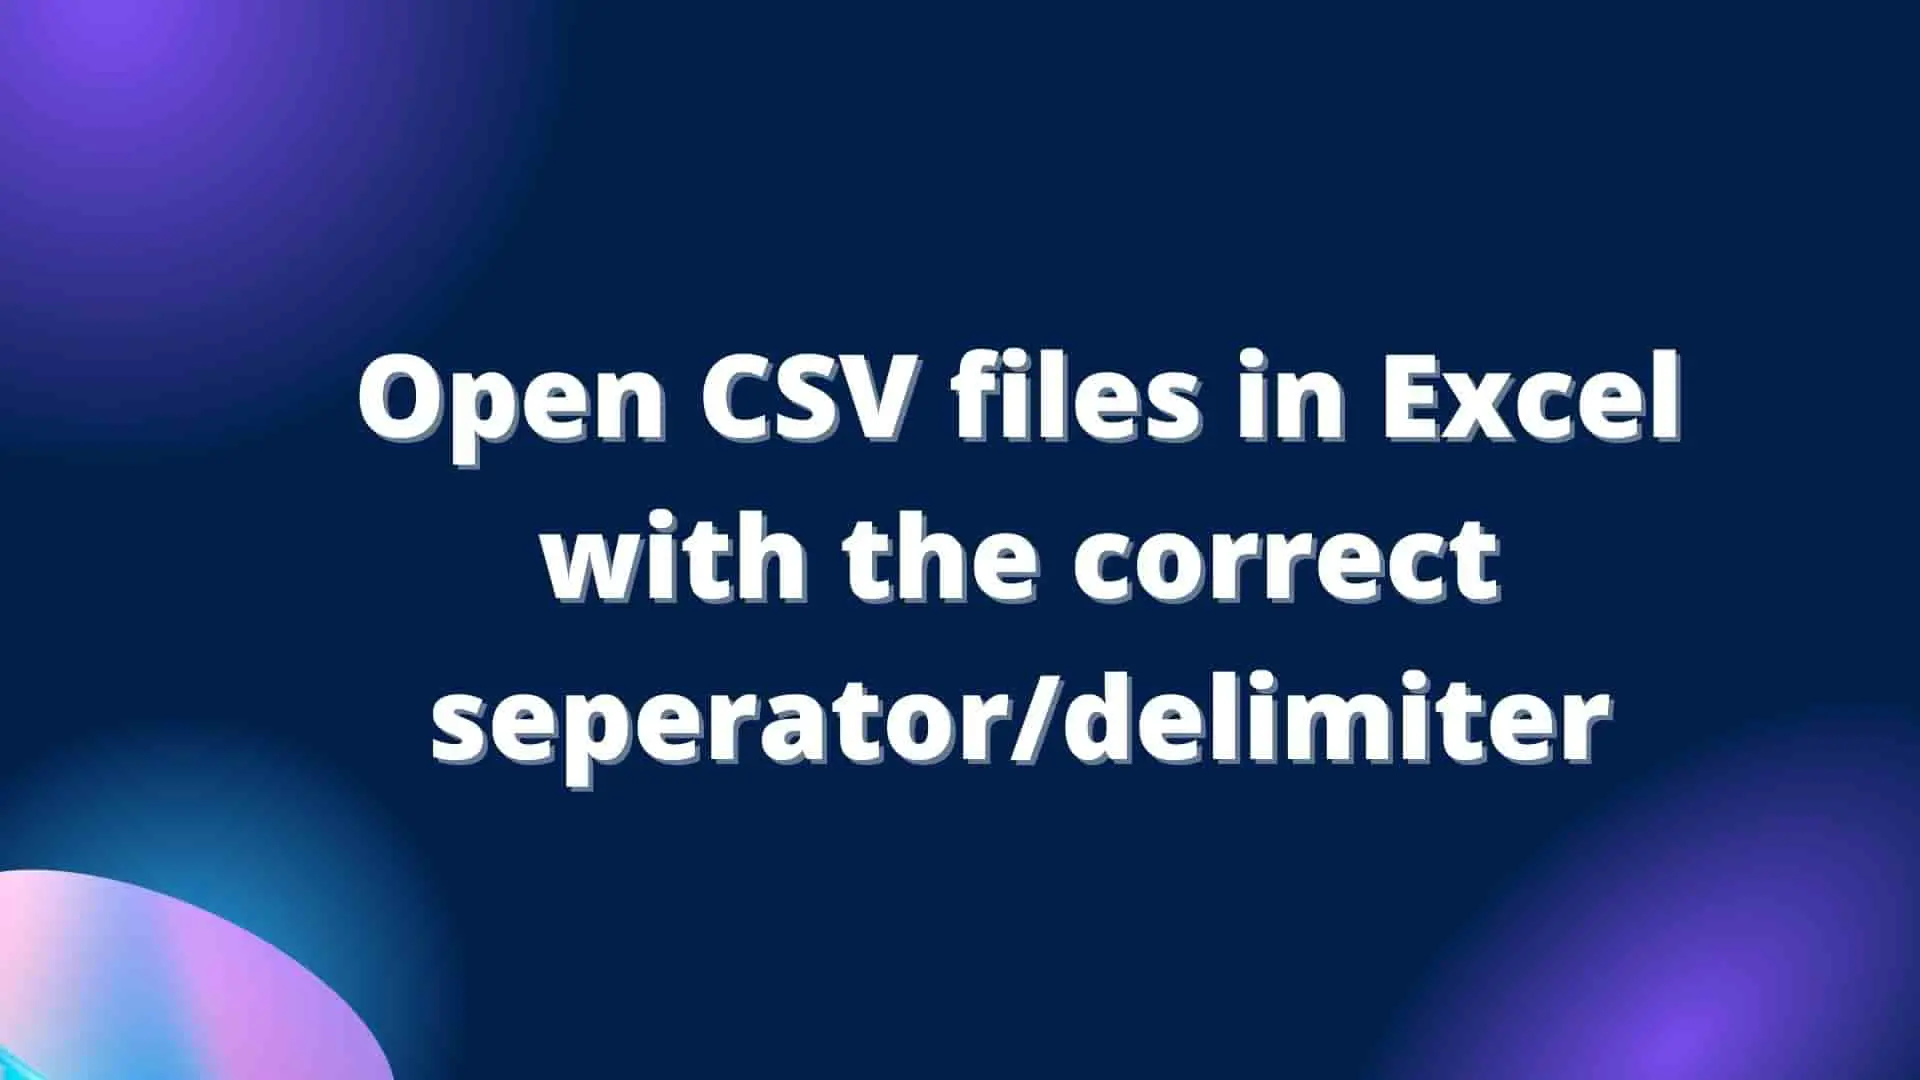 open-csv-files-in-excel-with-correct-separator-delimiter